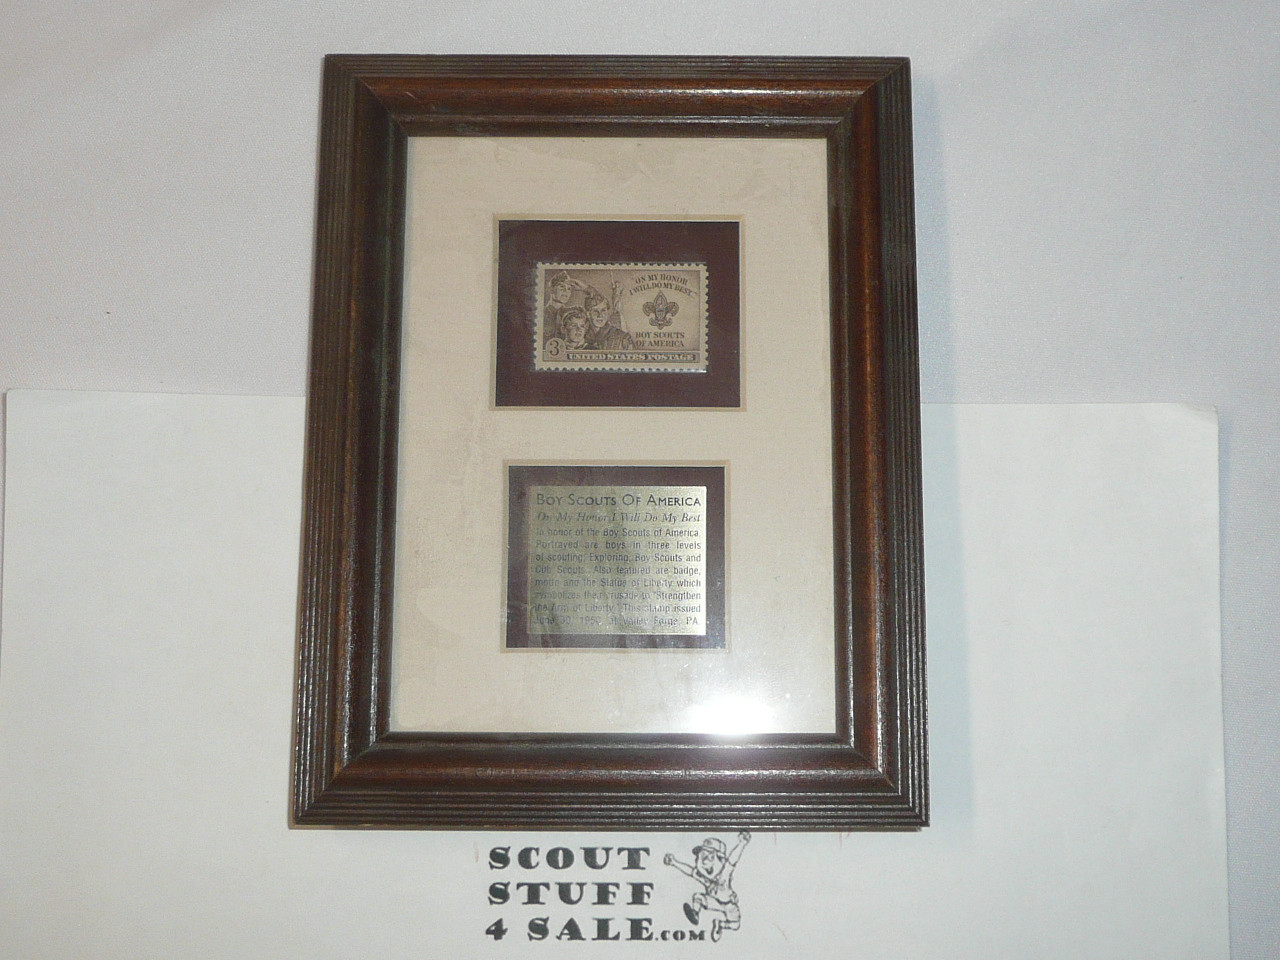 1950 Boy Scouts of America 3 cent Stamp, framed with brass description